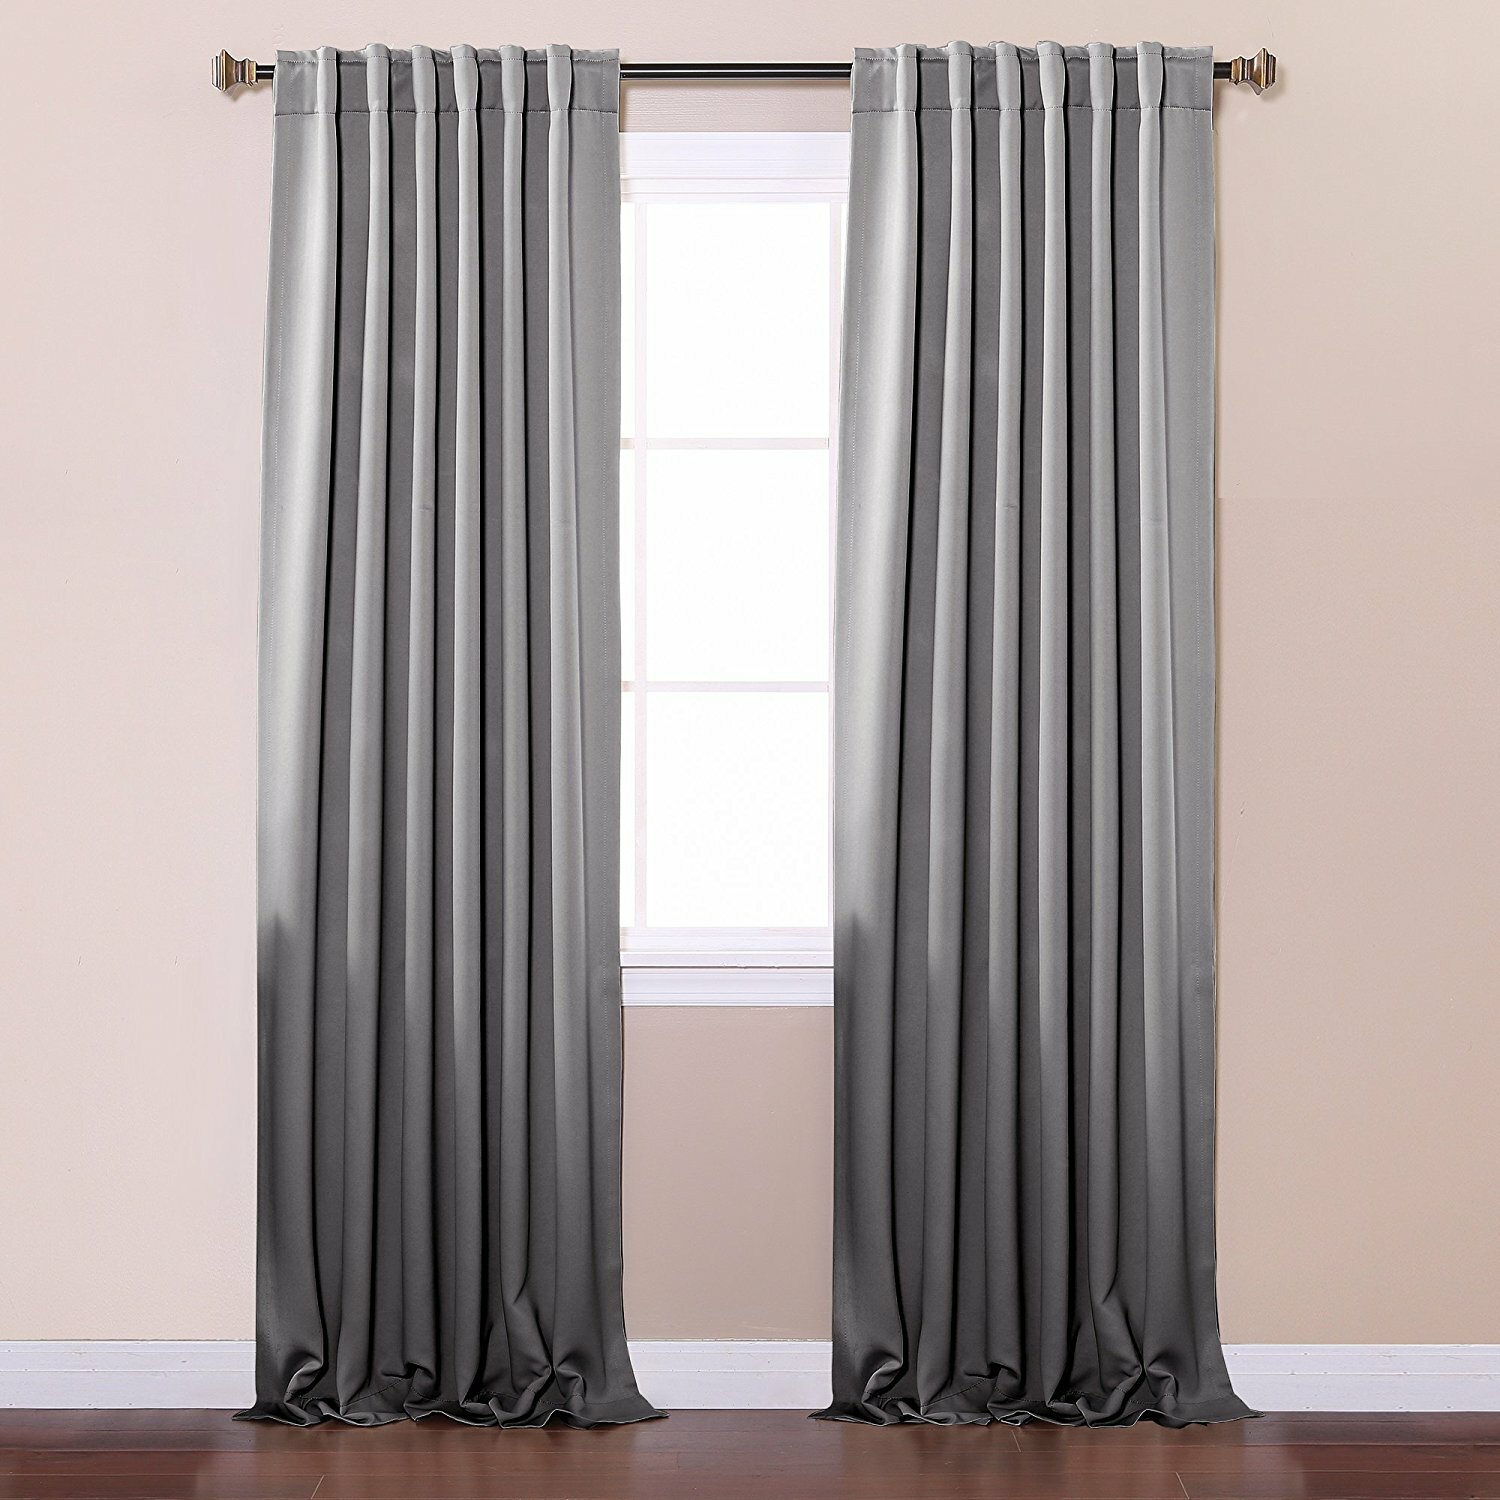 Curtains Thermal Blackout | White Darkening Curtains | Cheap Blackout Curtains